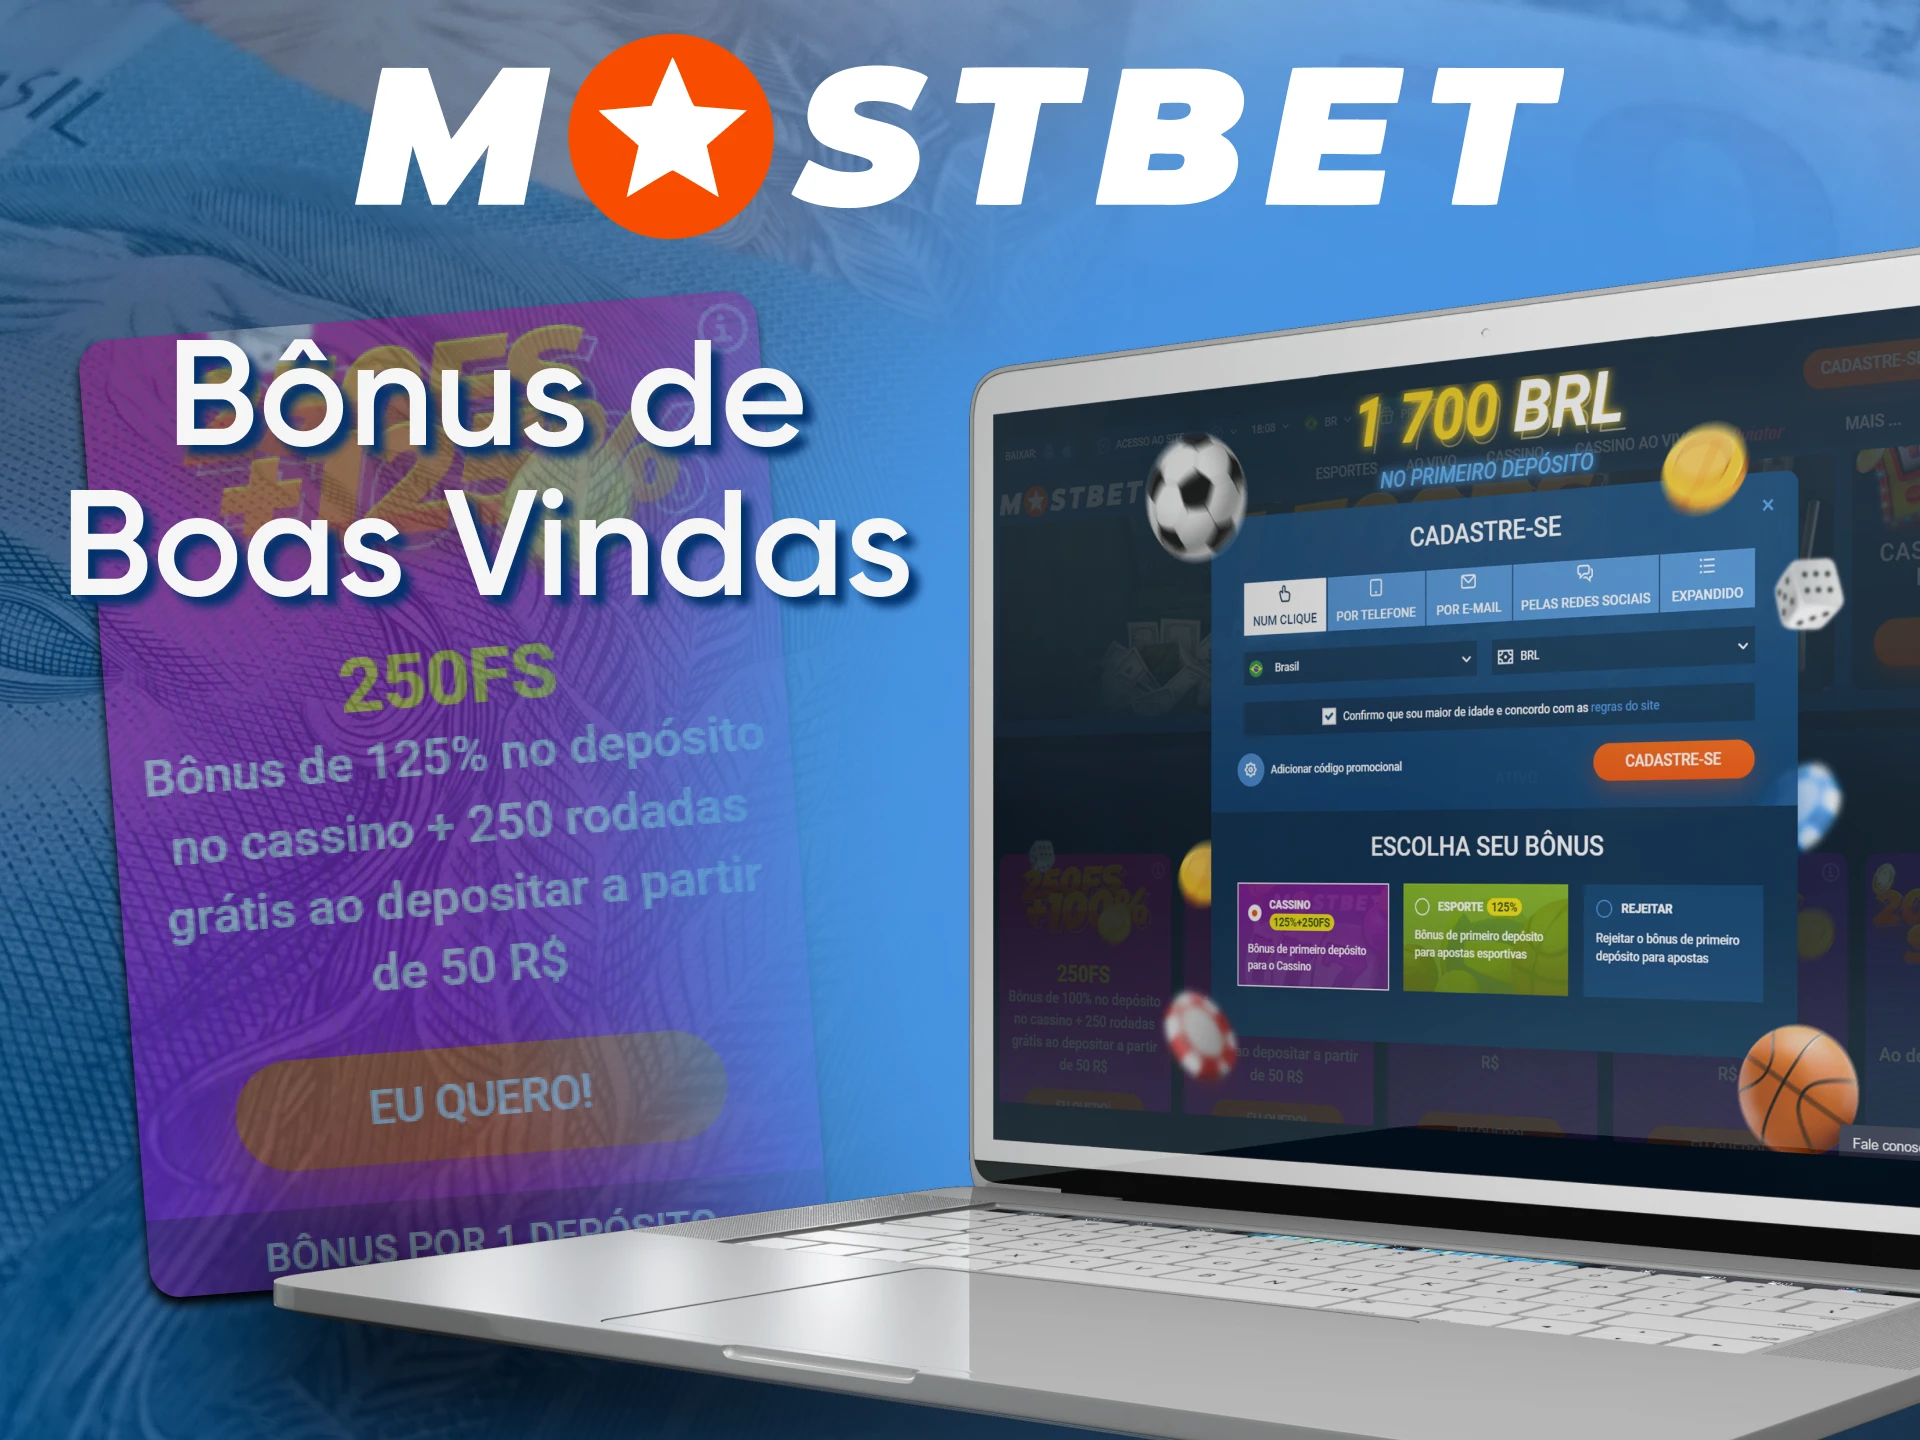 Upon registration you will receive a bonus from Mostbet.